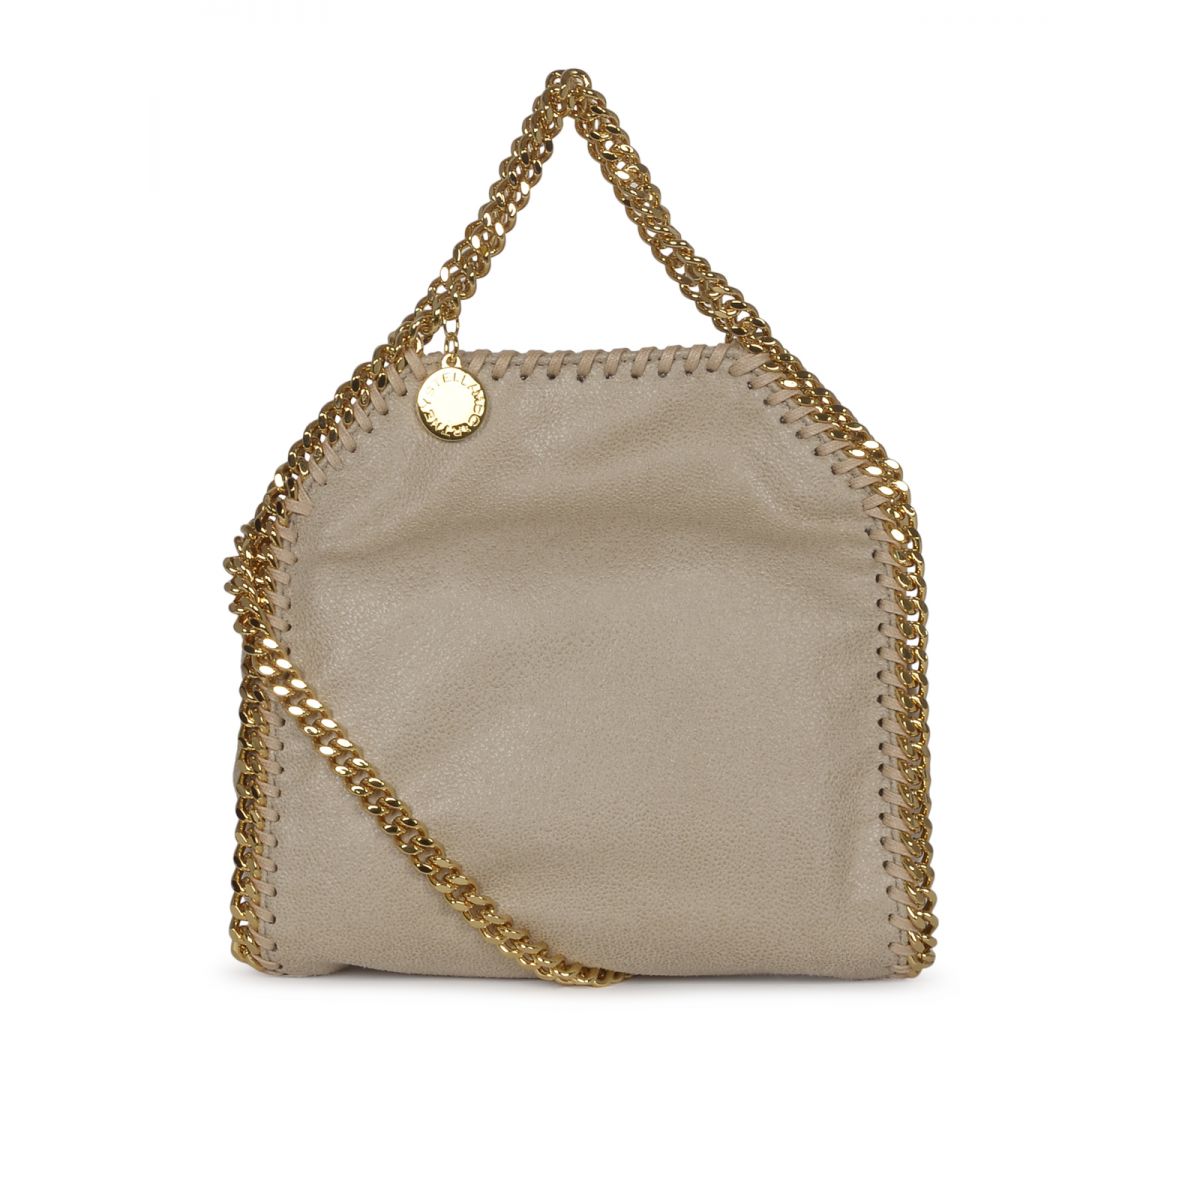 STELLA MCCARTNEY - TINY TOTE ECO SHAGGY DEER W/GOLD COLOR CHAIN